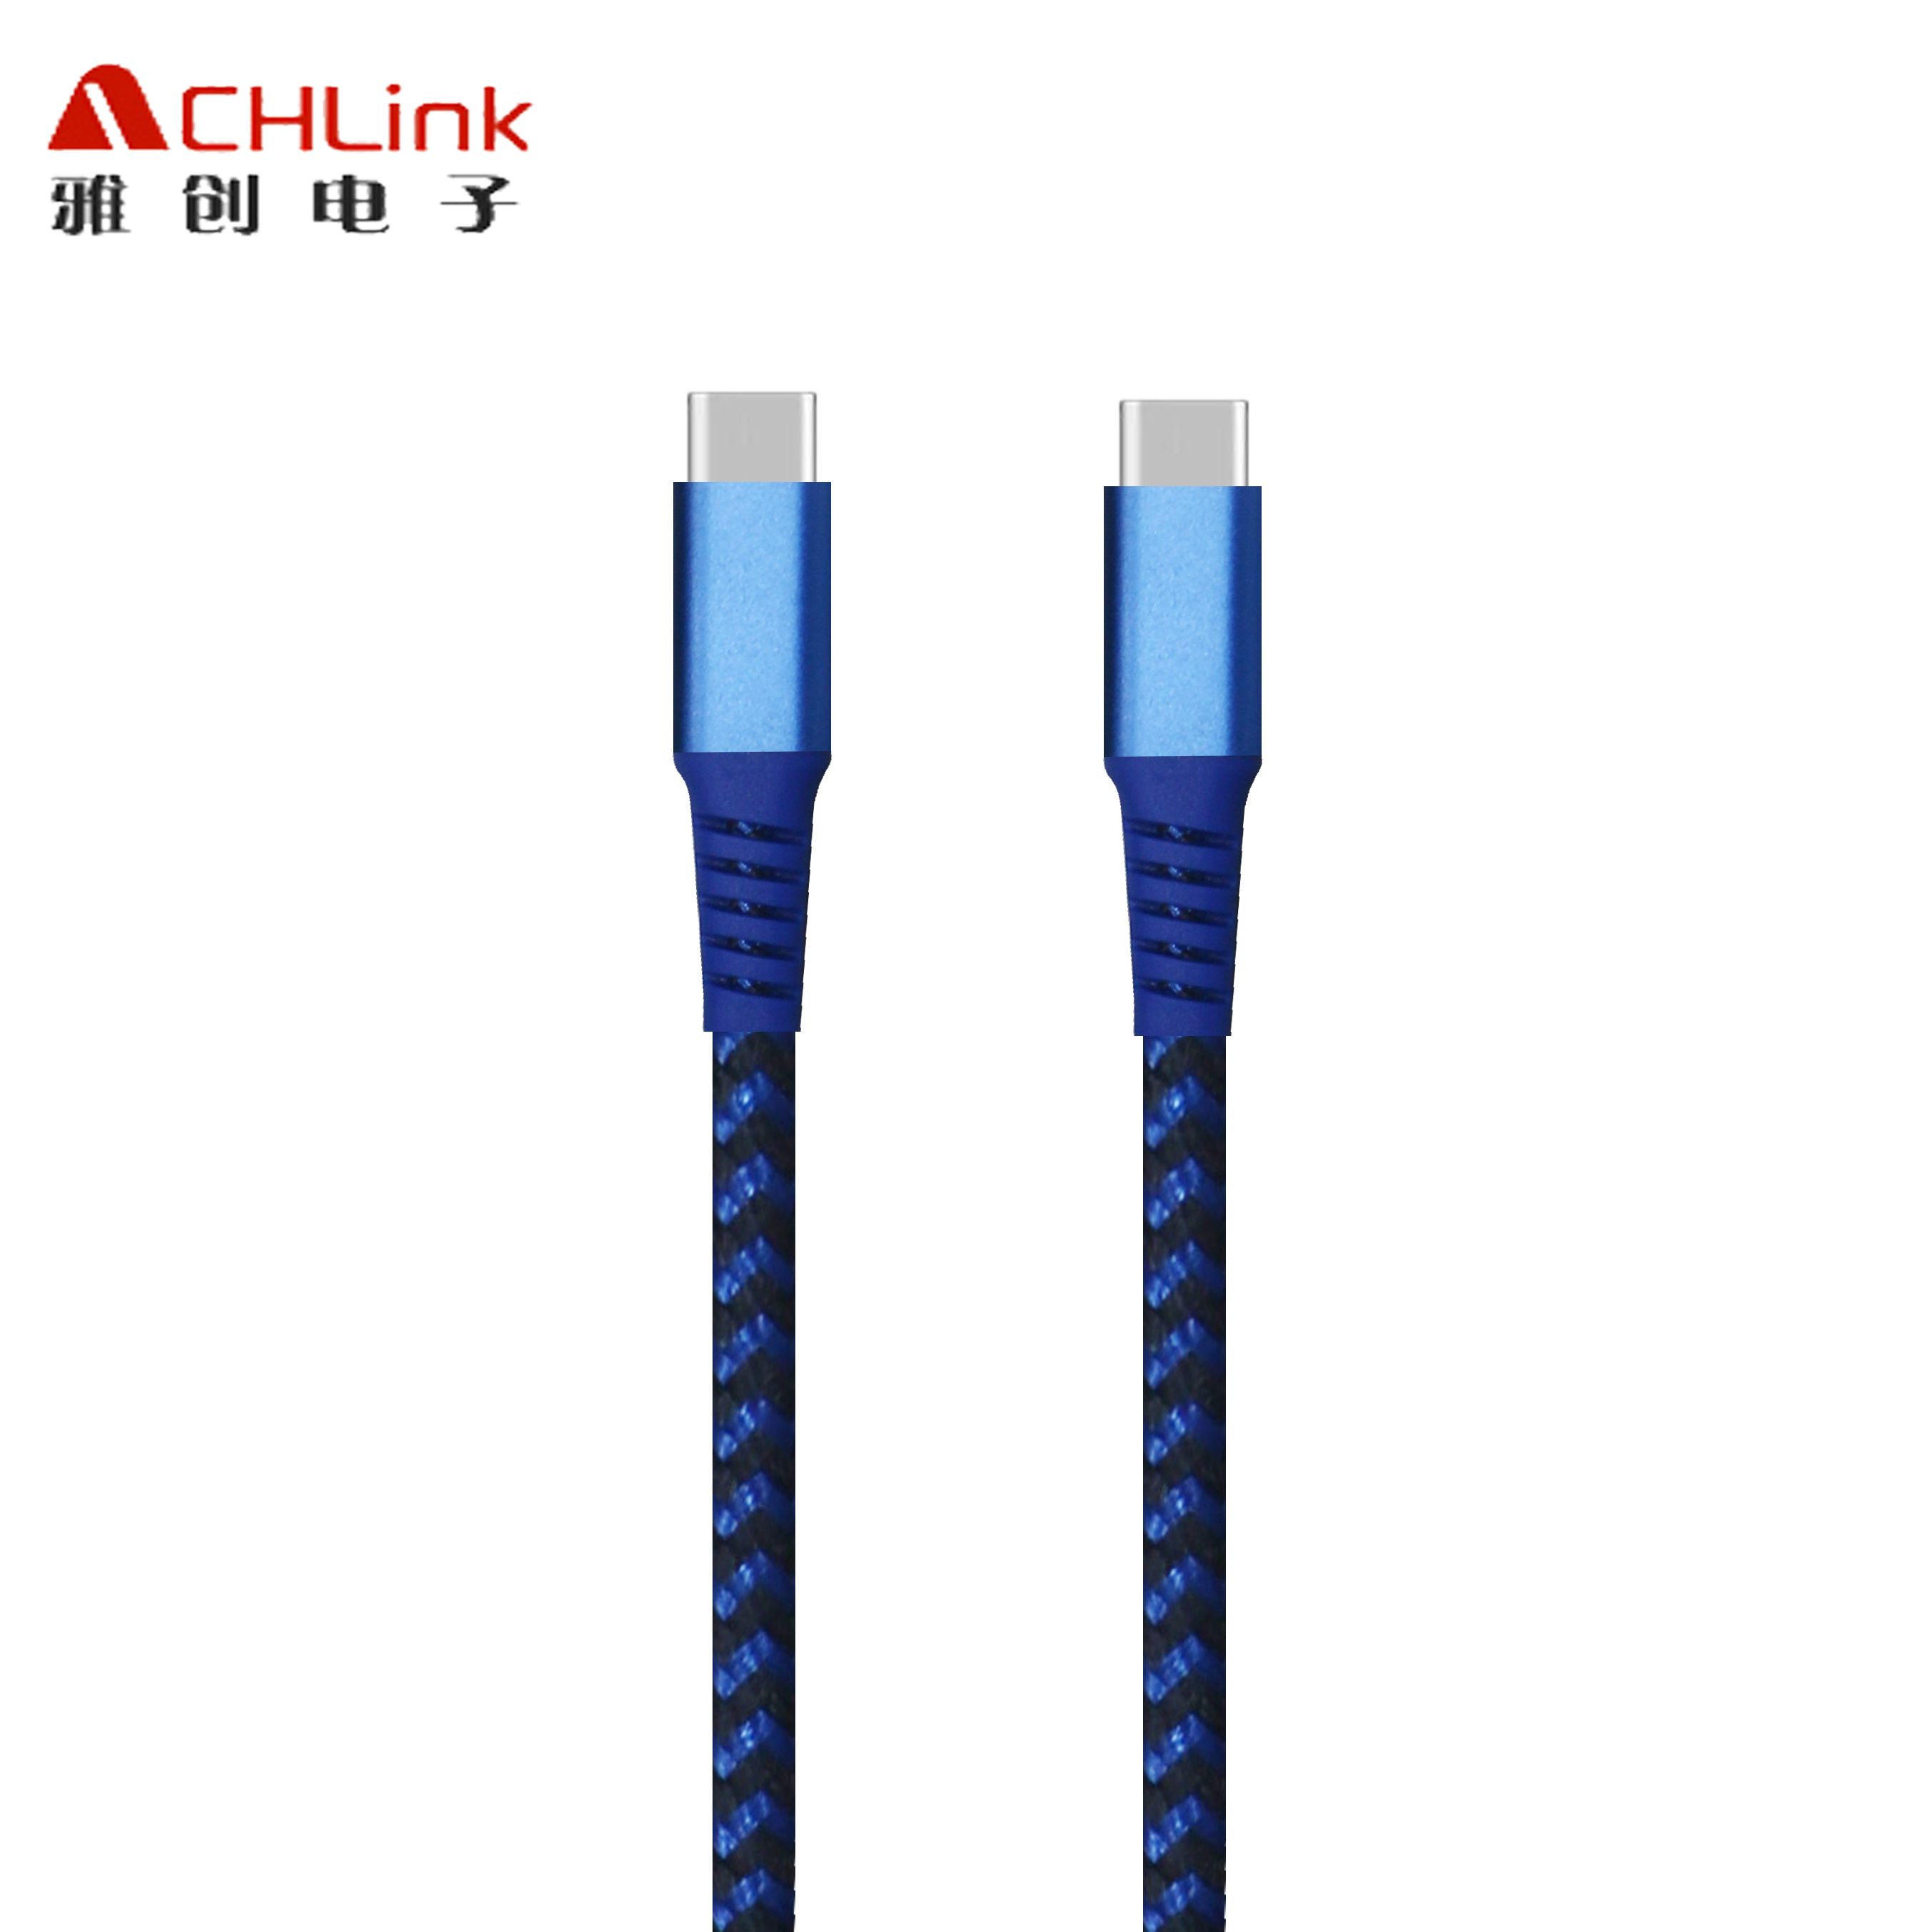 40Gbps 100W USB4 Cable Fast Charging Usb C to Usb C Cable Support dual 4K@60Hz Compatible with Thund